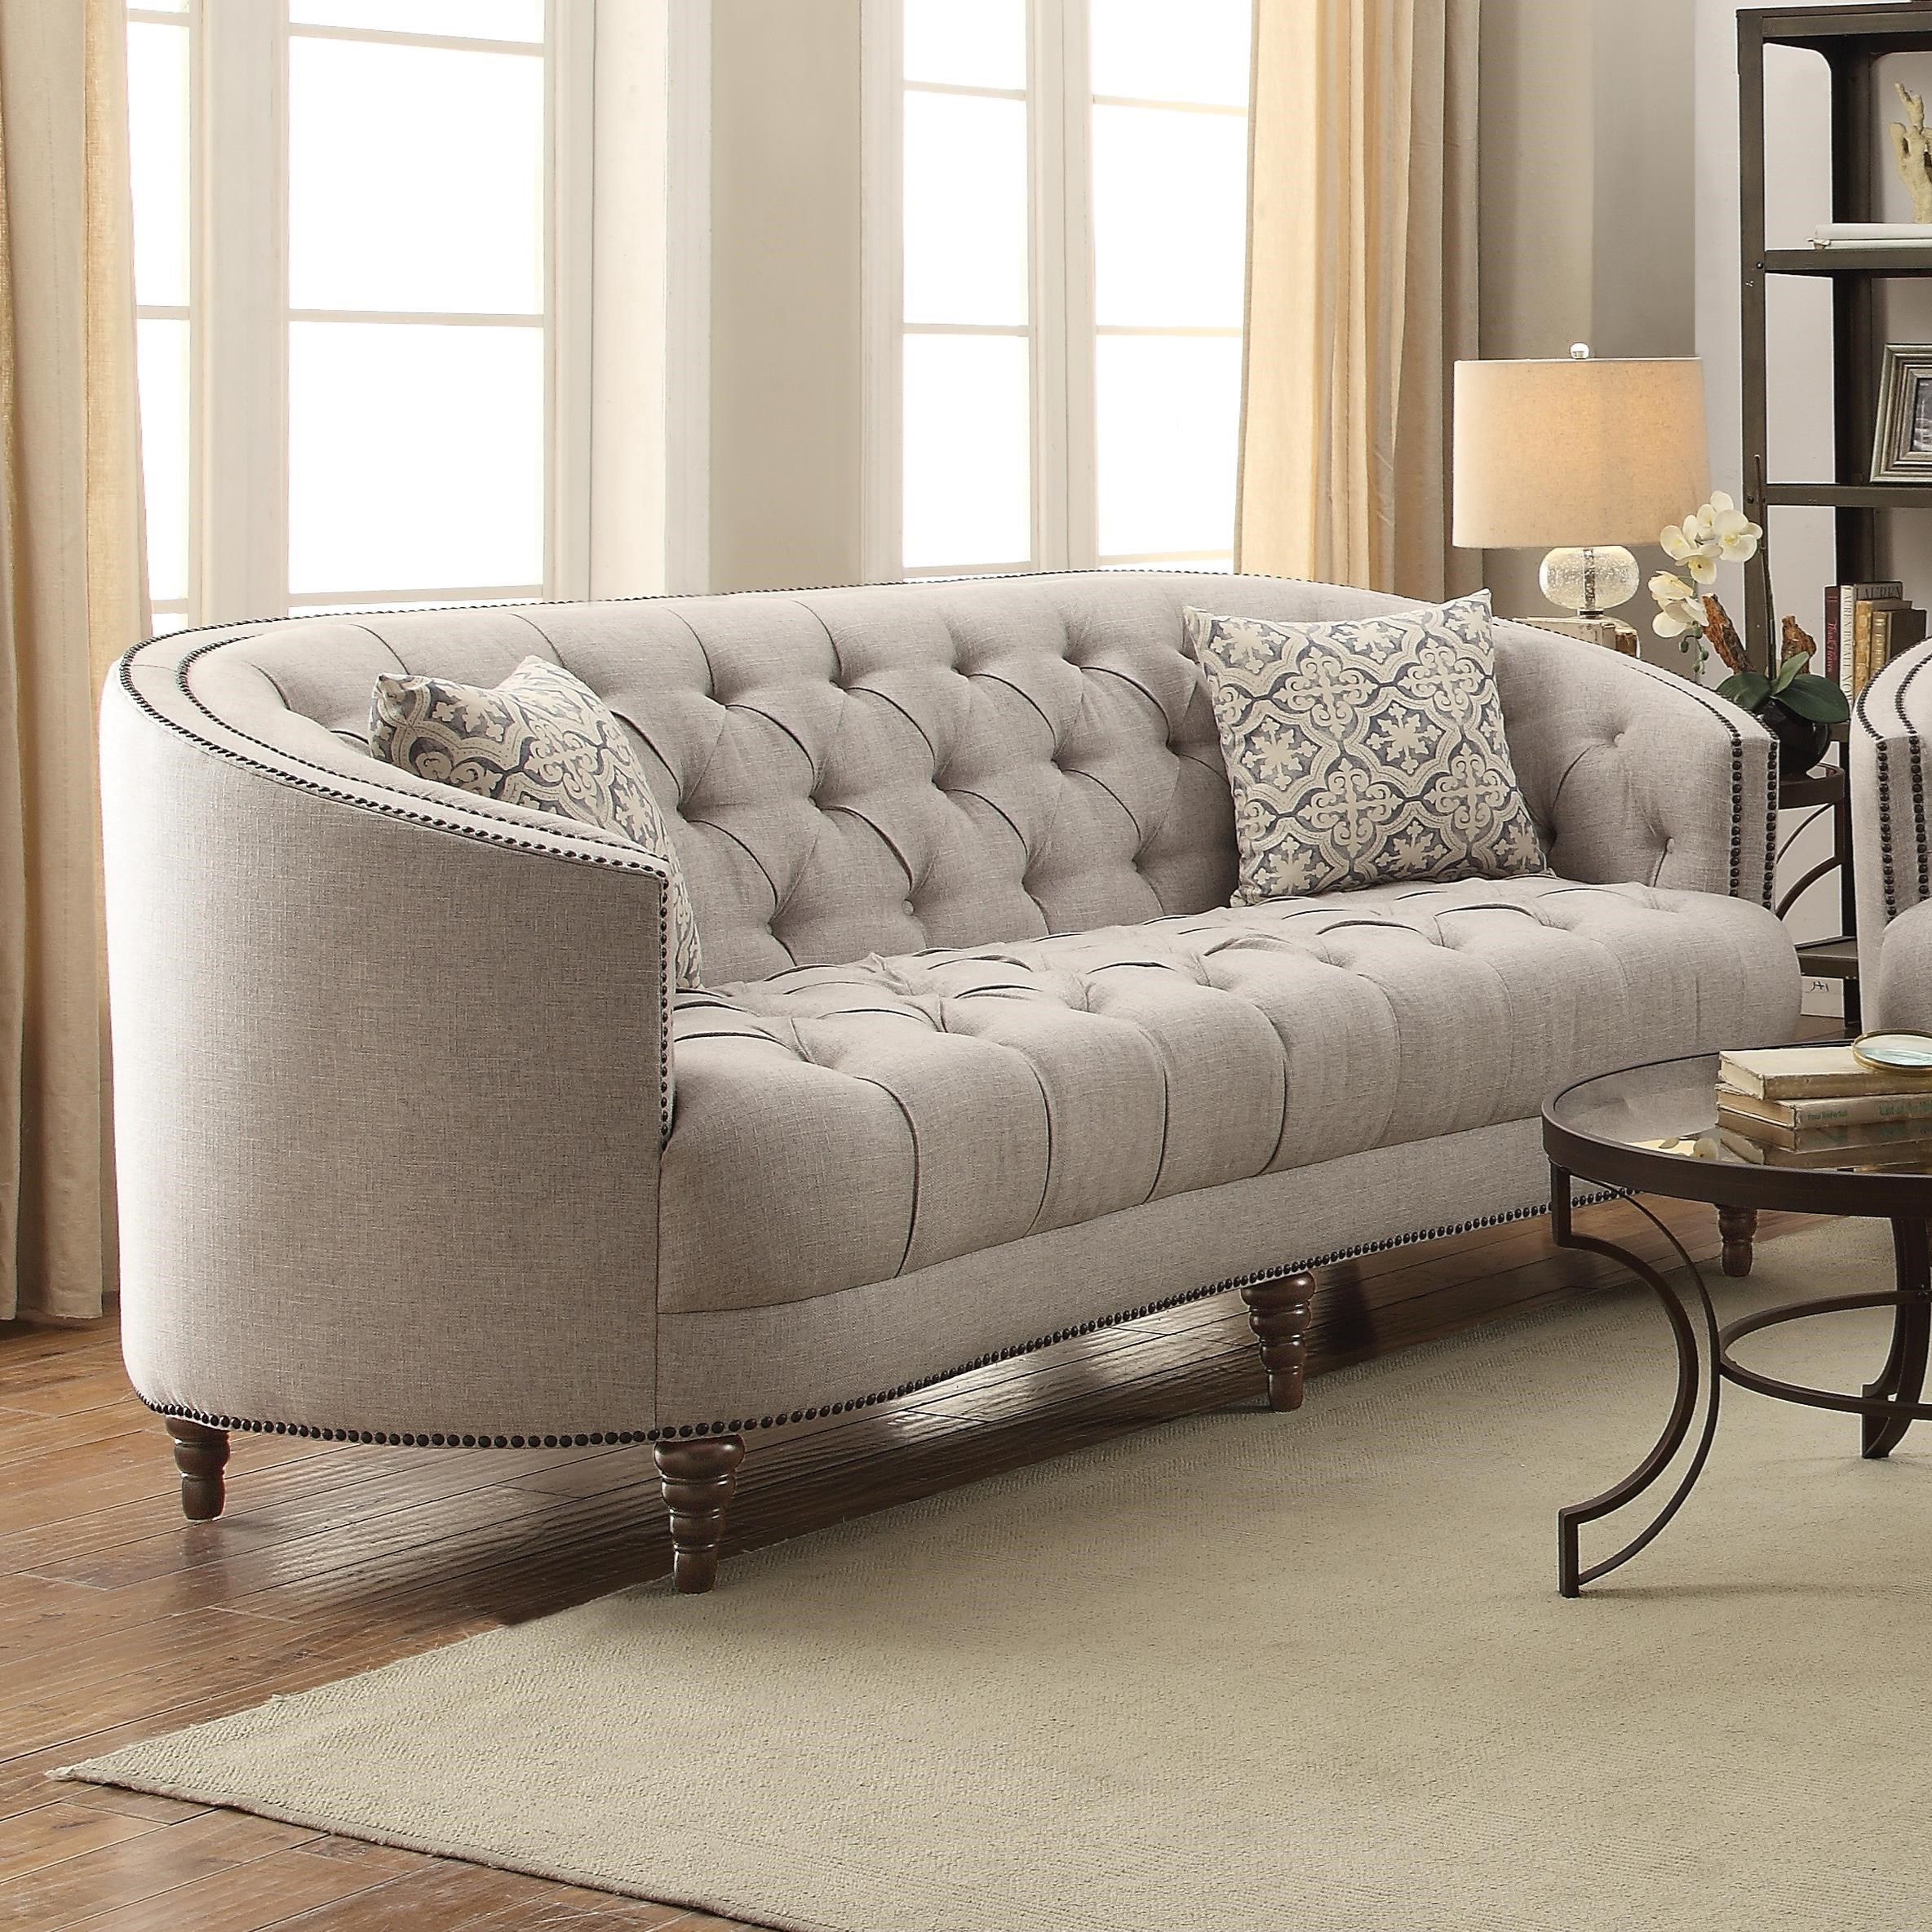 Coaster Avonlea C Shaped Sofa With Button Tufting And Nailhead Trim With Tufted Upholstered Sofas (View 14 of 20)